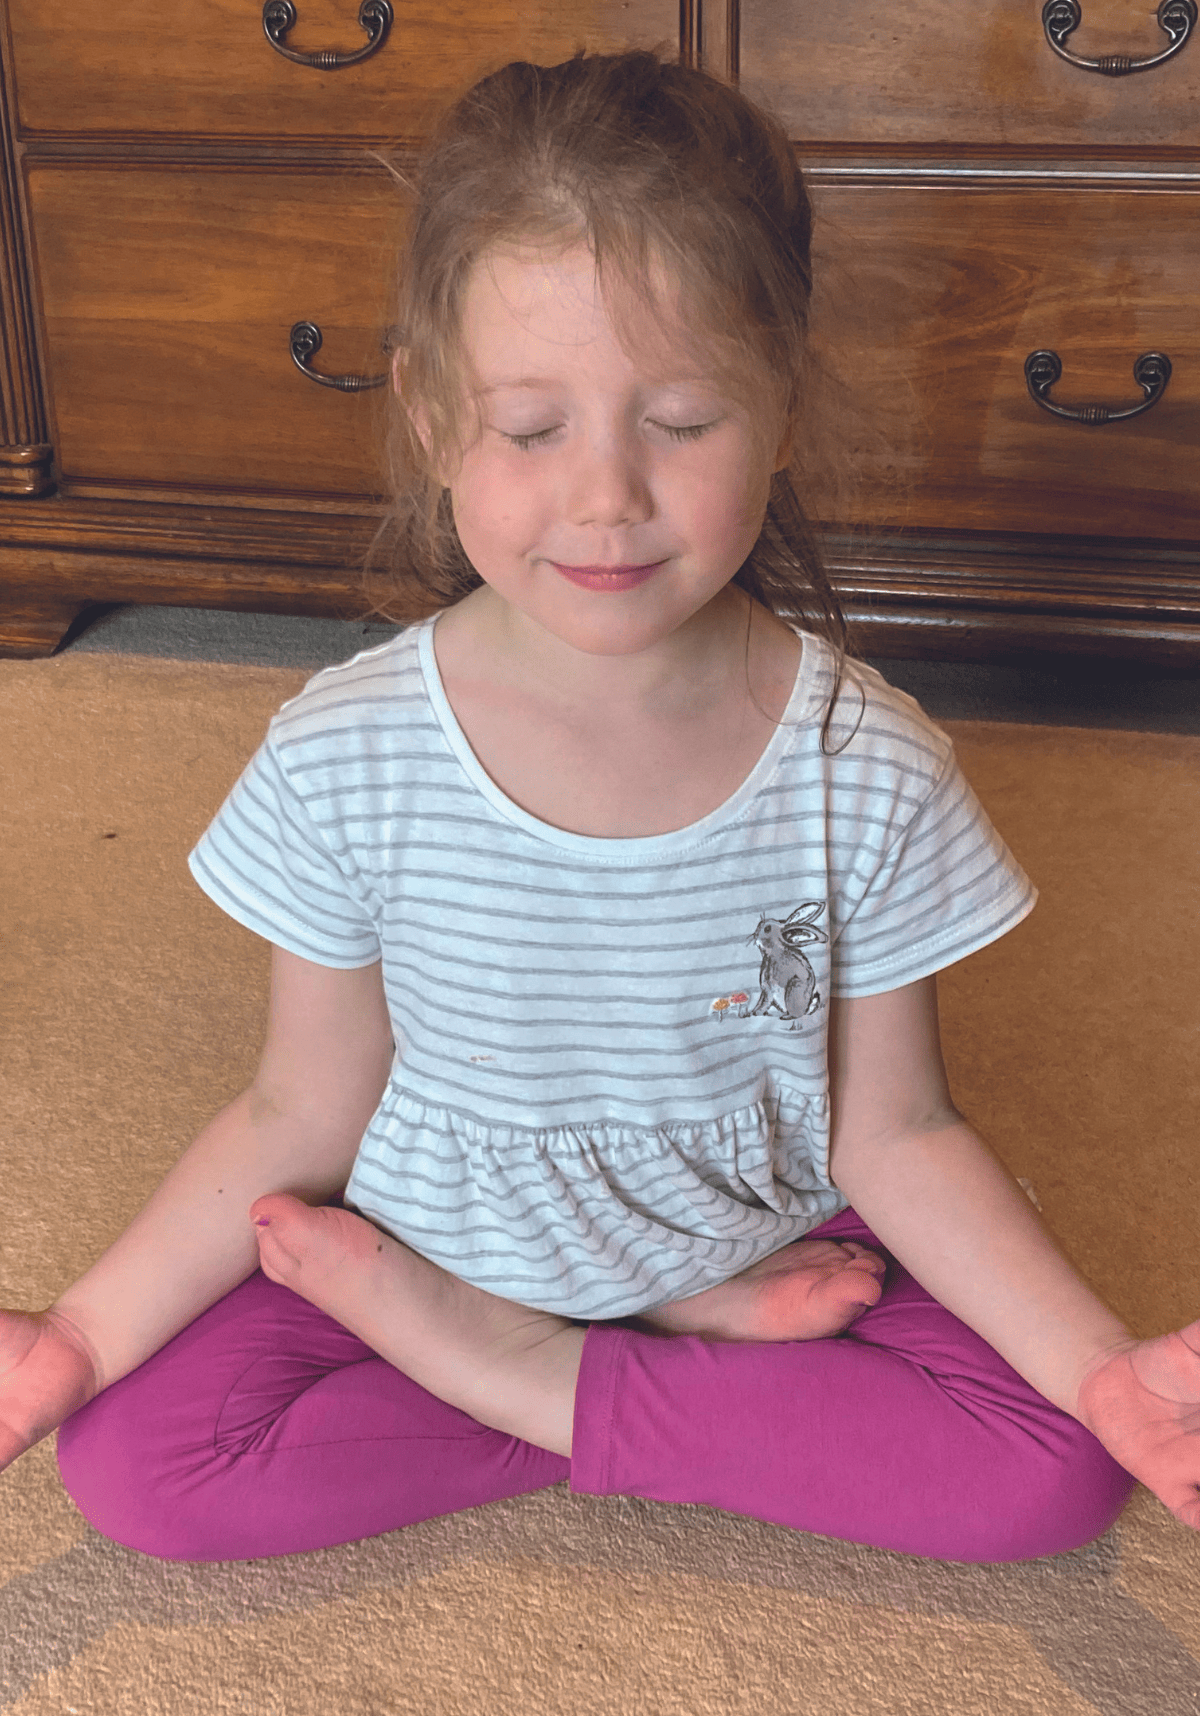 Tracey Webster’s granddaughter, Ava, in lotus pose